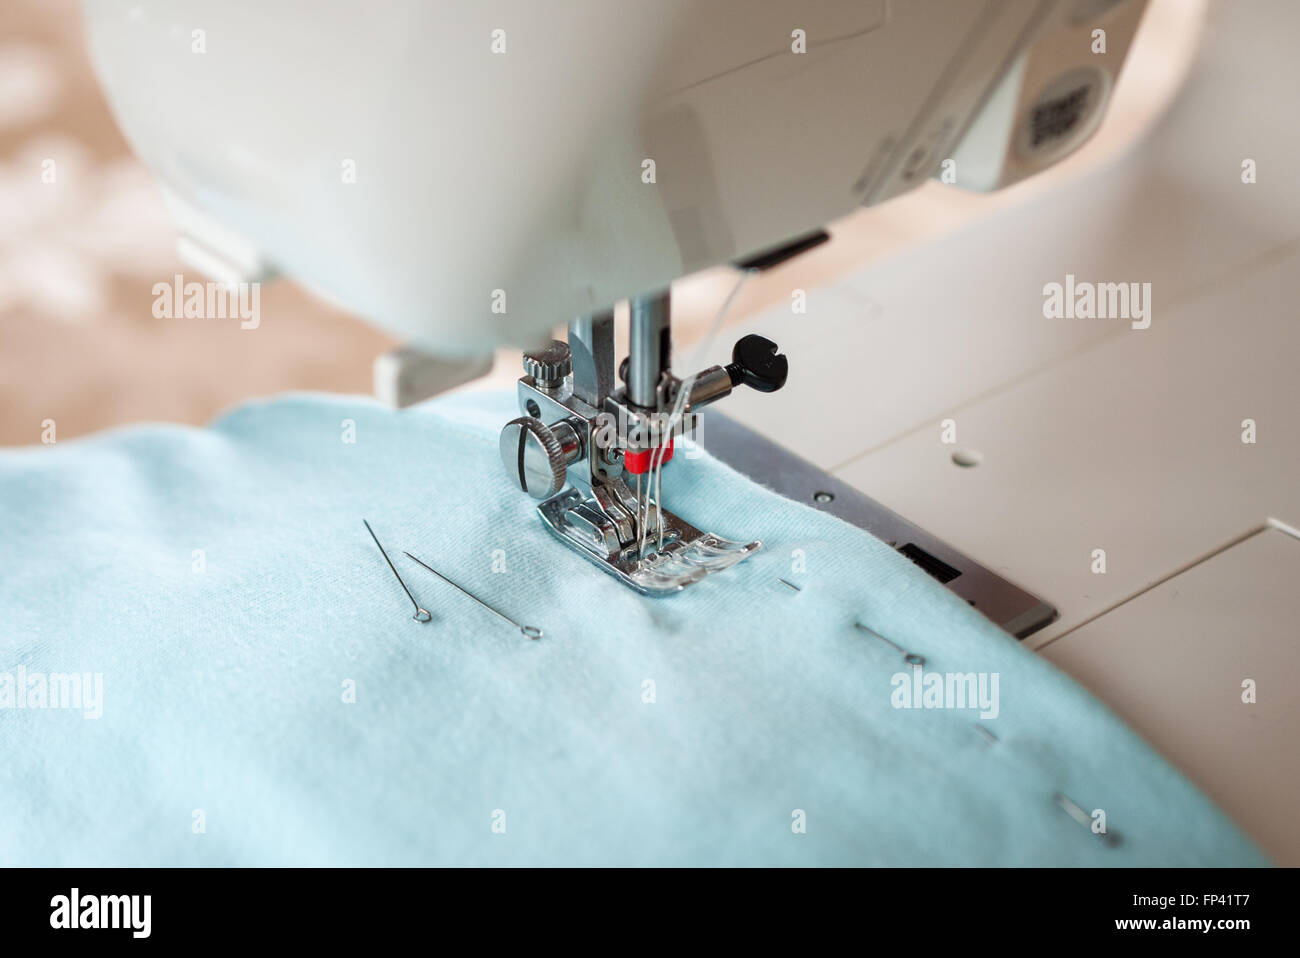 Sewing machine, blue fabric and pins Stock Photo